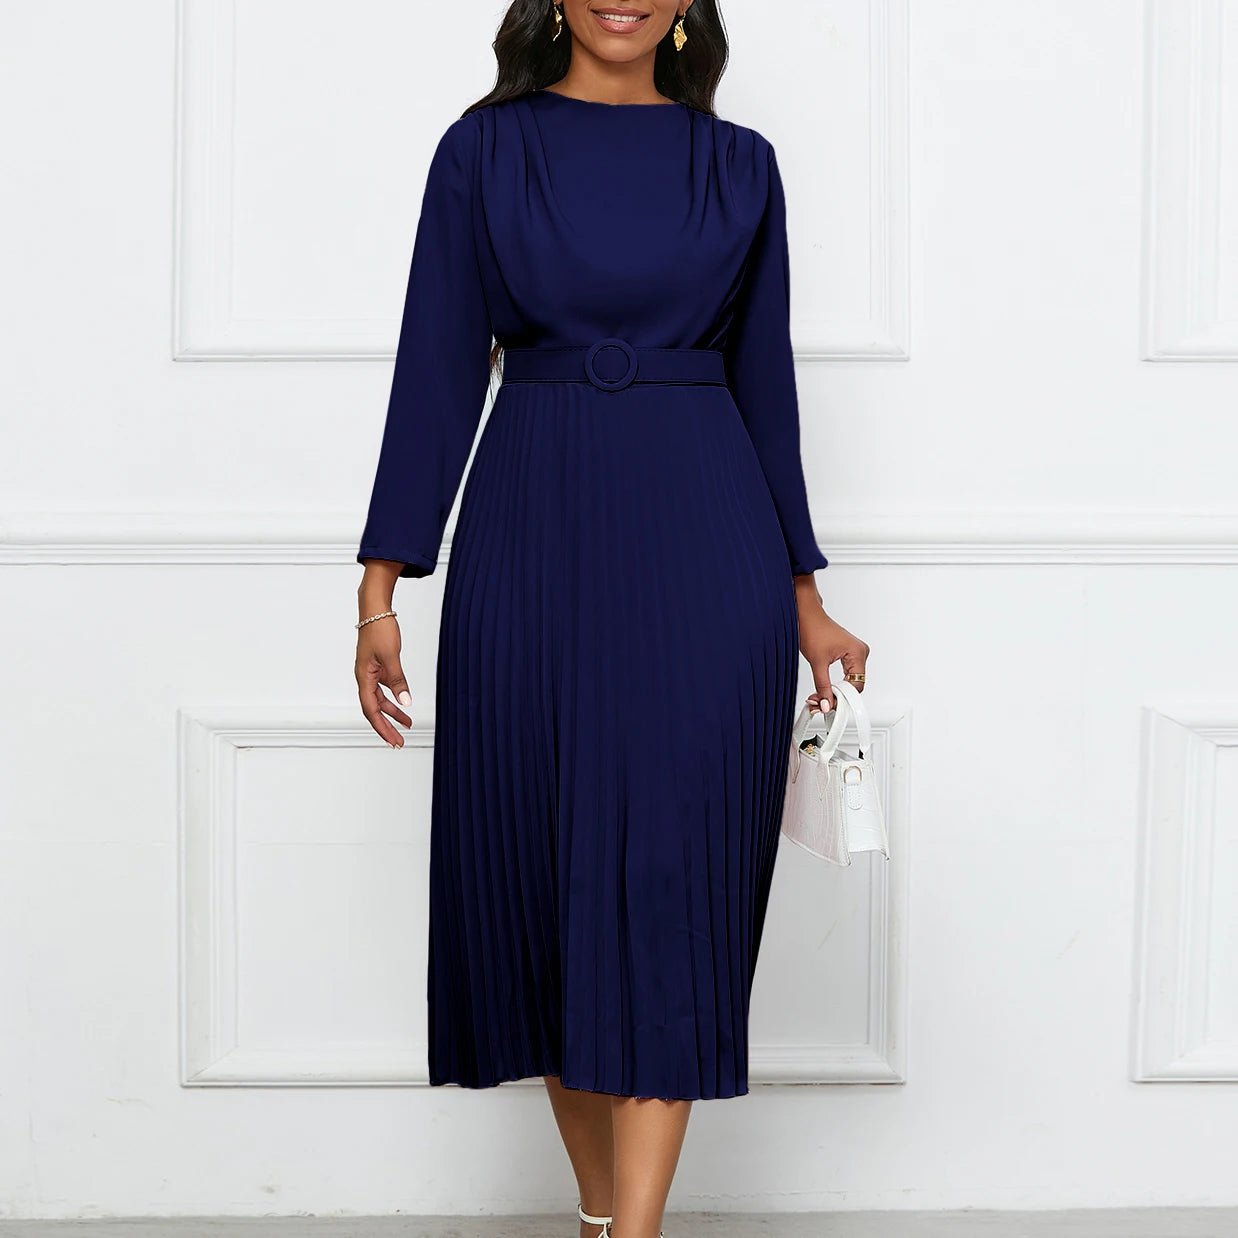 Professional Women's Pleated Dress: Round Neck, Full Sleeves, Belt - Waisted, Mid - Calf Length - Perfect for Formal Business Workwear - Flexi Africa - Free Delivery Worldwide only at www.flexiafrica.com